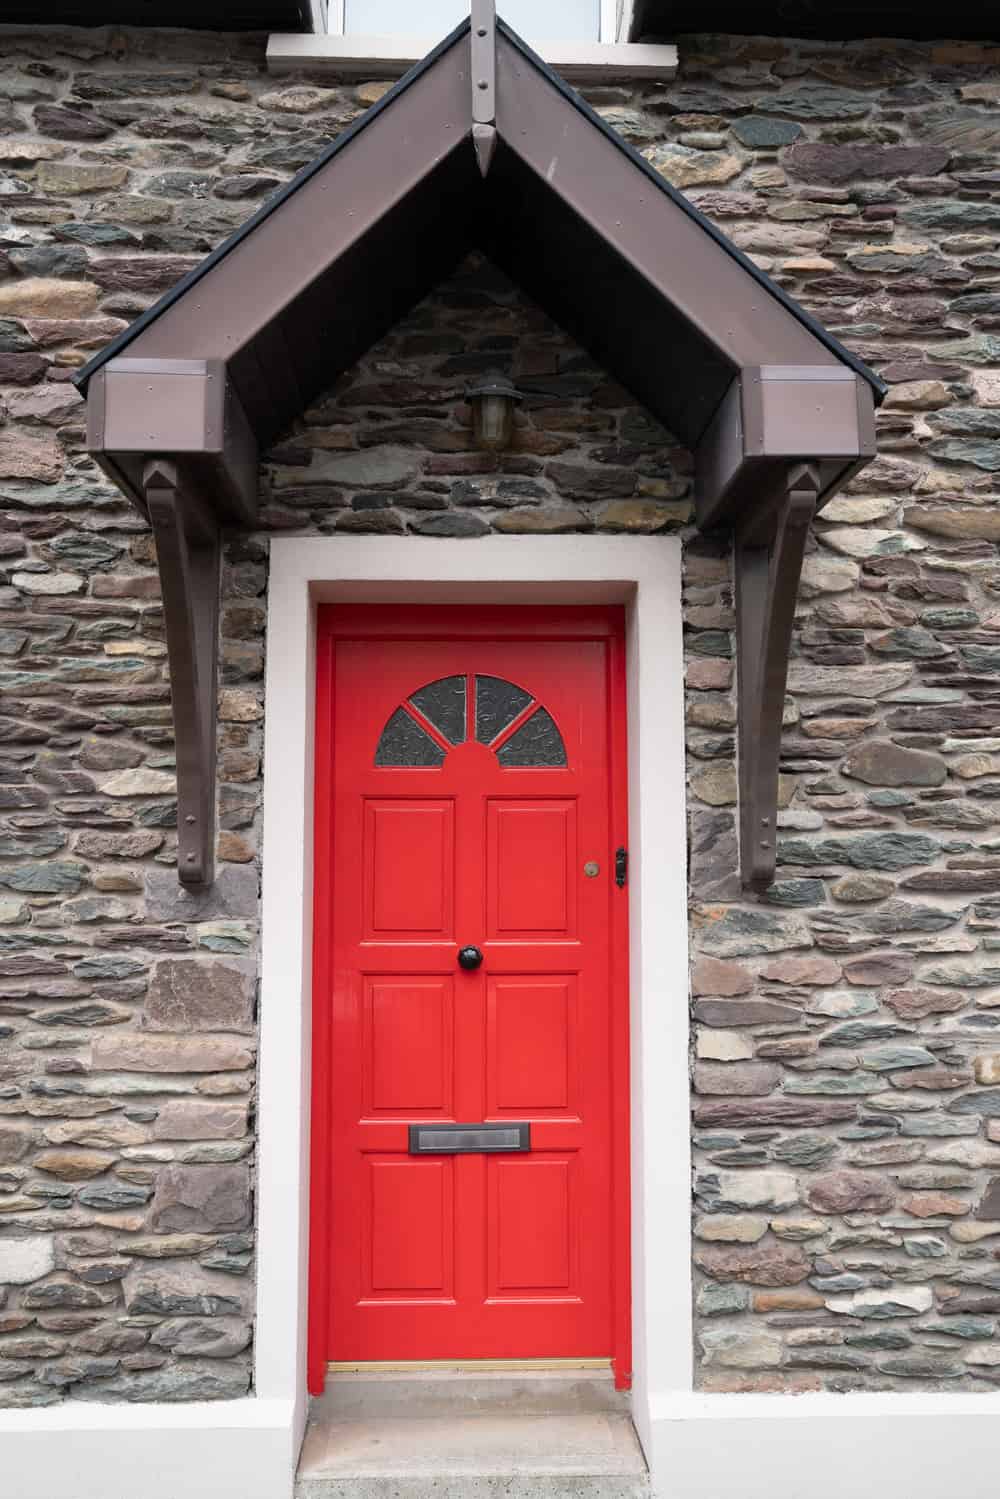 Red door under gable shelter in stone wall